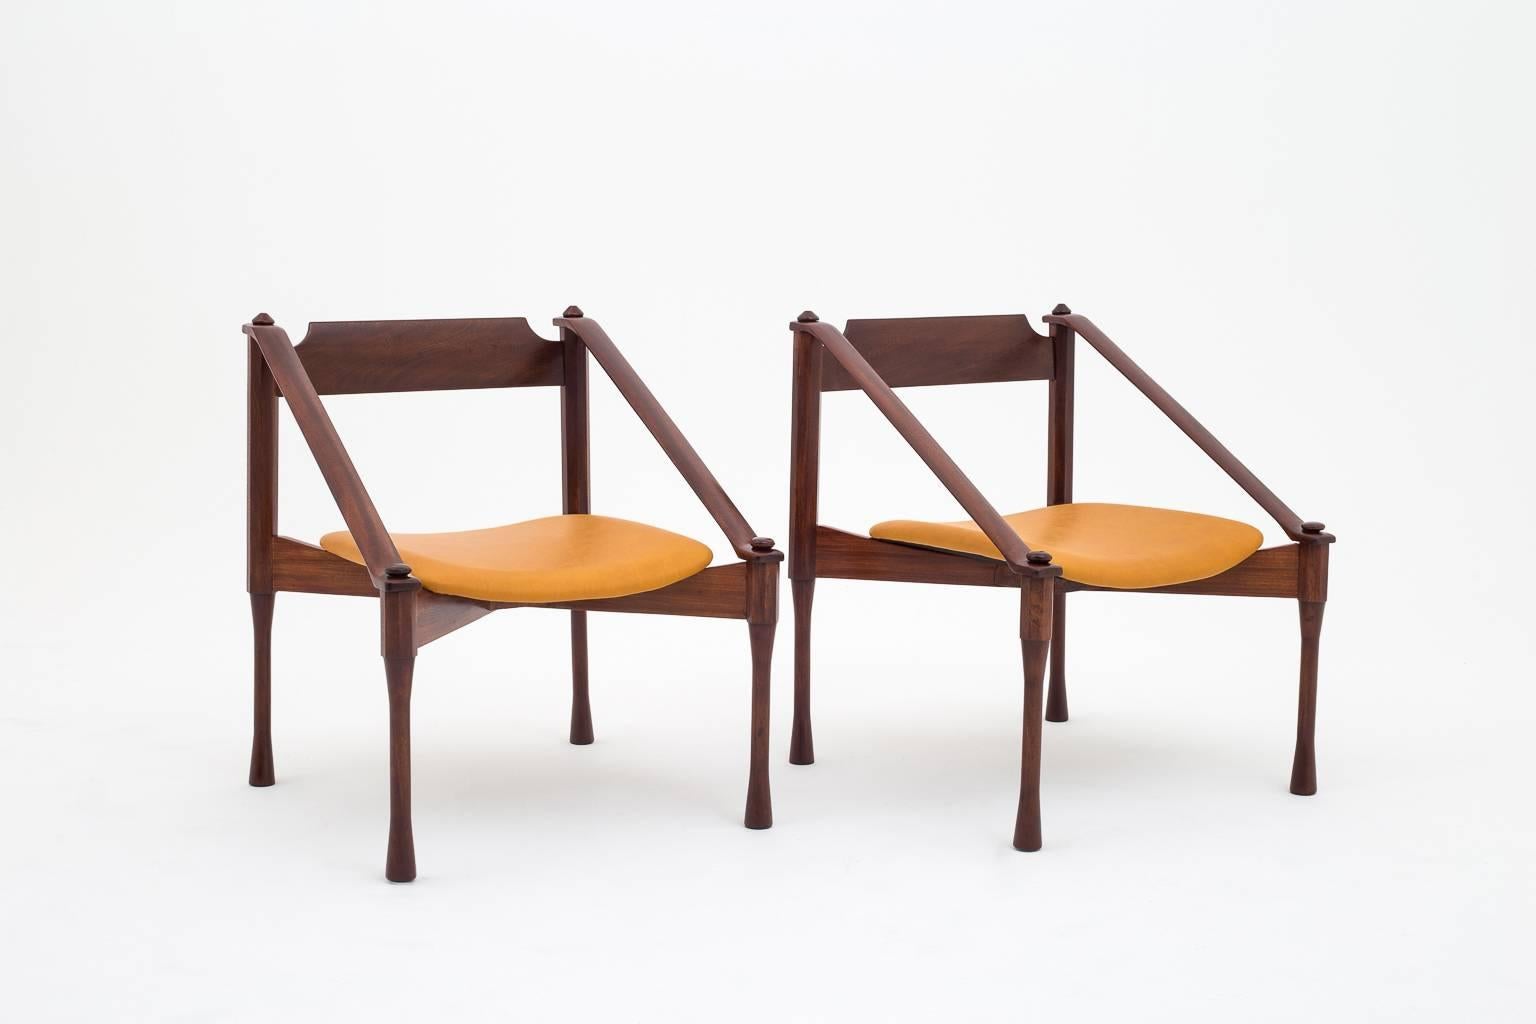 Rare pair of armchairs by Giulio Moscatelli, Italy, 1960.
Refined and distinctive shape and combination of forms.
The chairs are made from solid Indian Rosewood and are upholstered with a smooth caramel colored leather. In excellent condition.
 